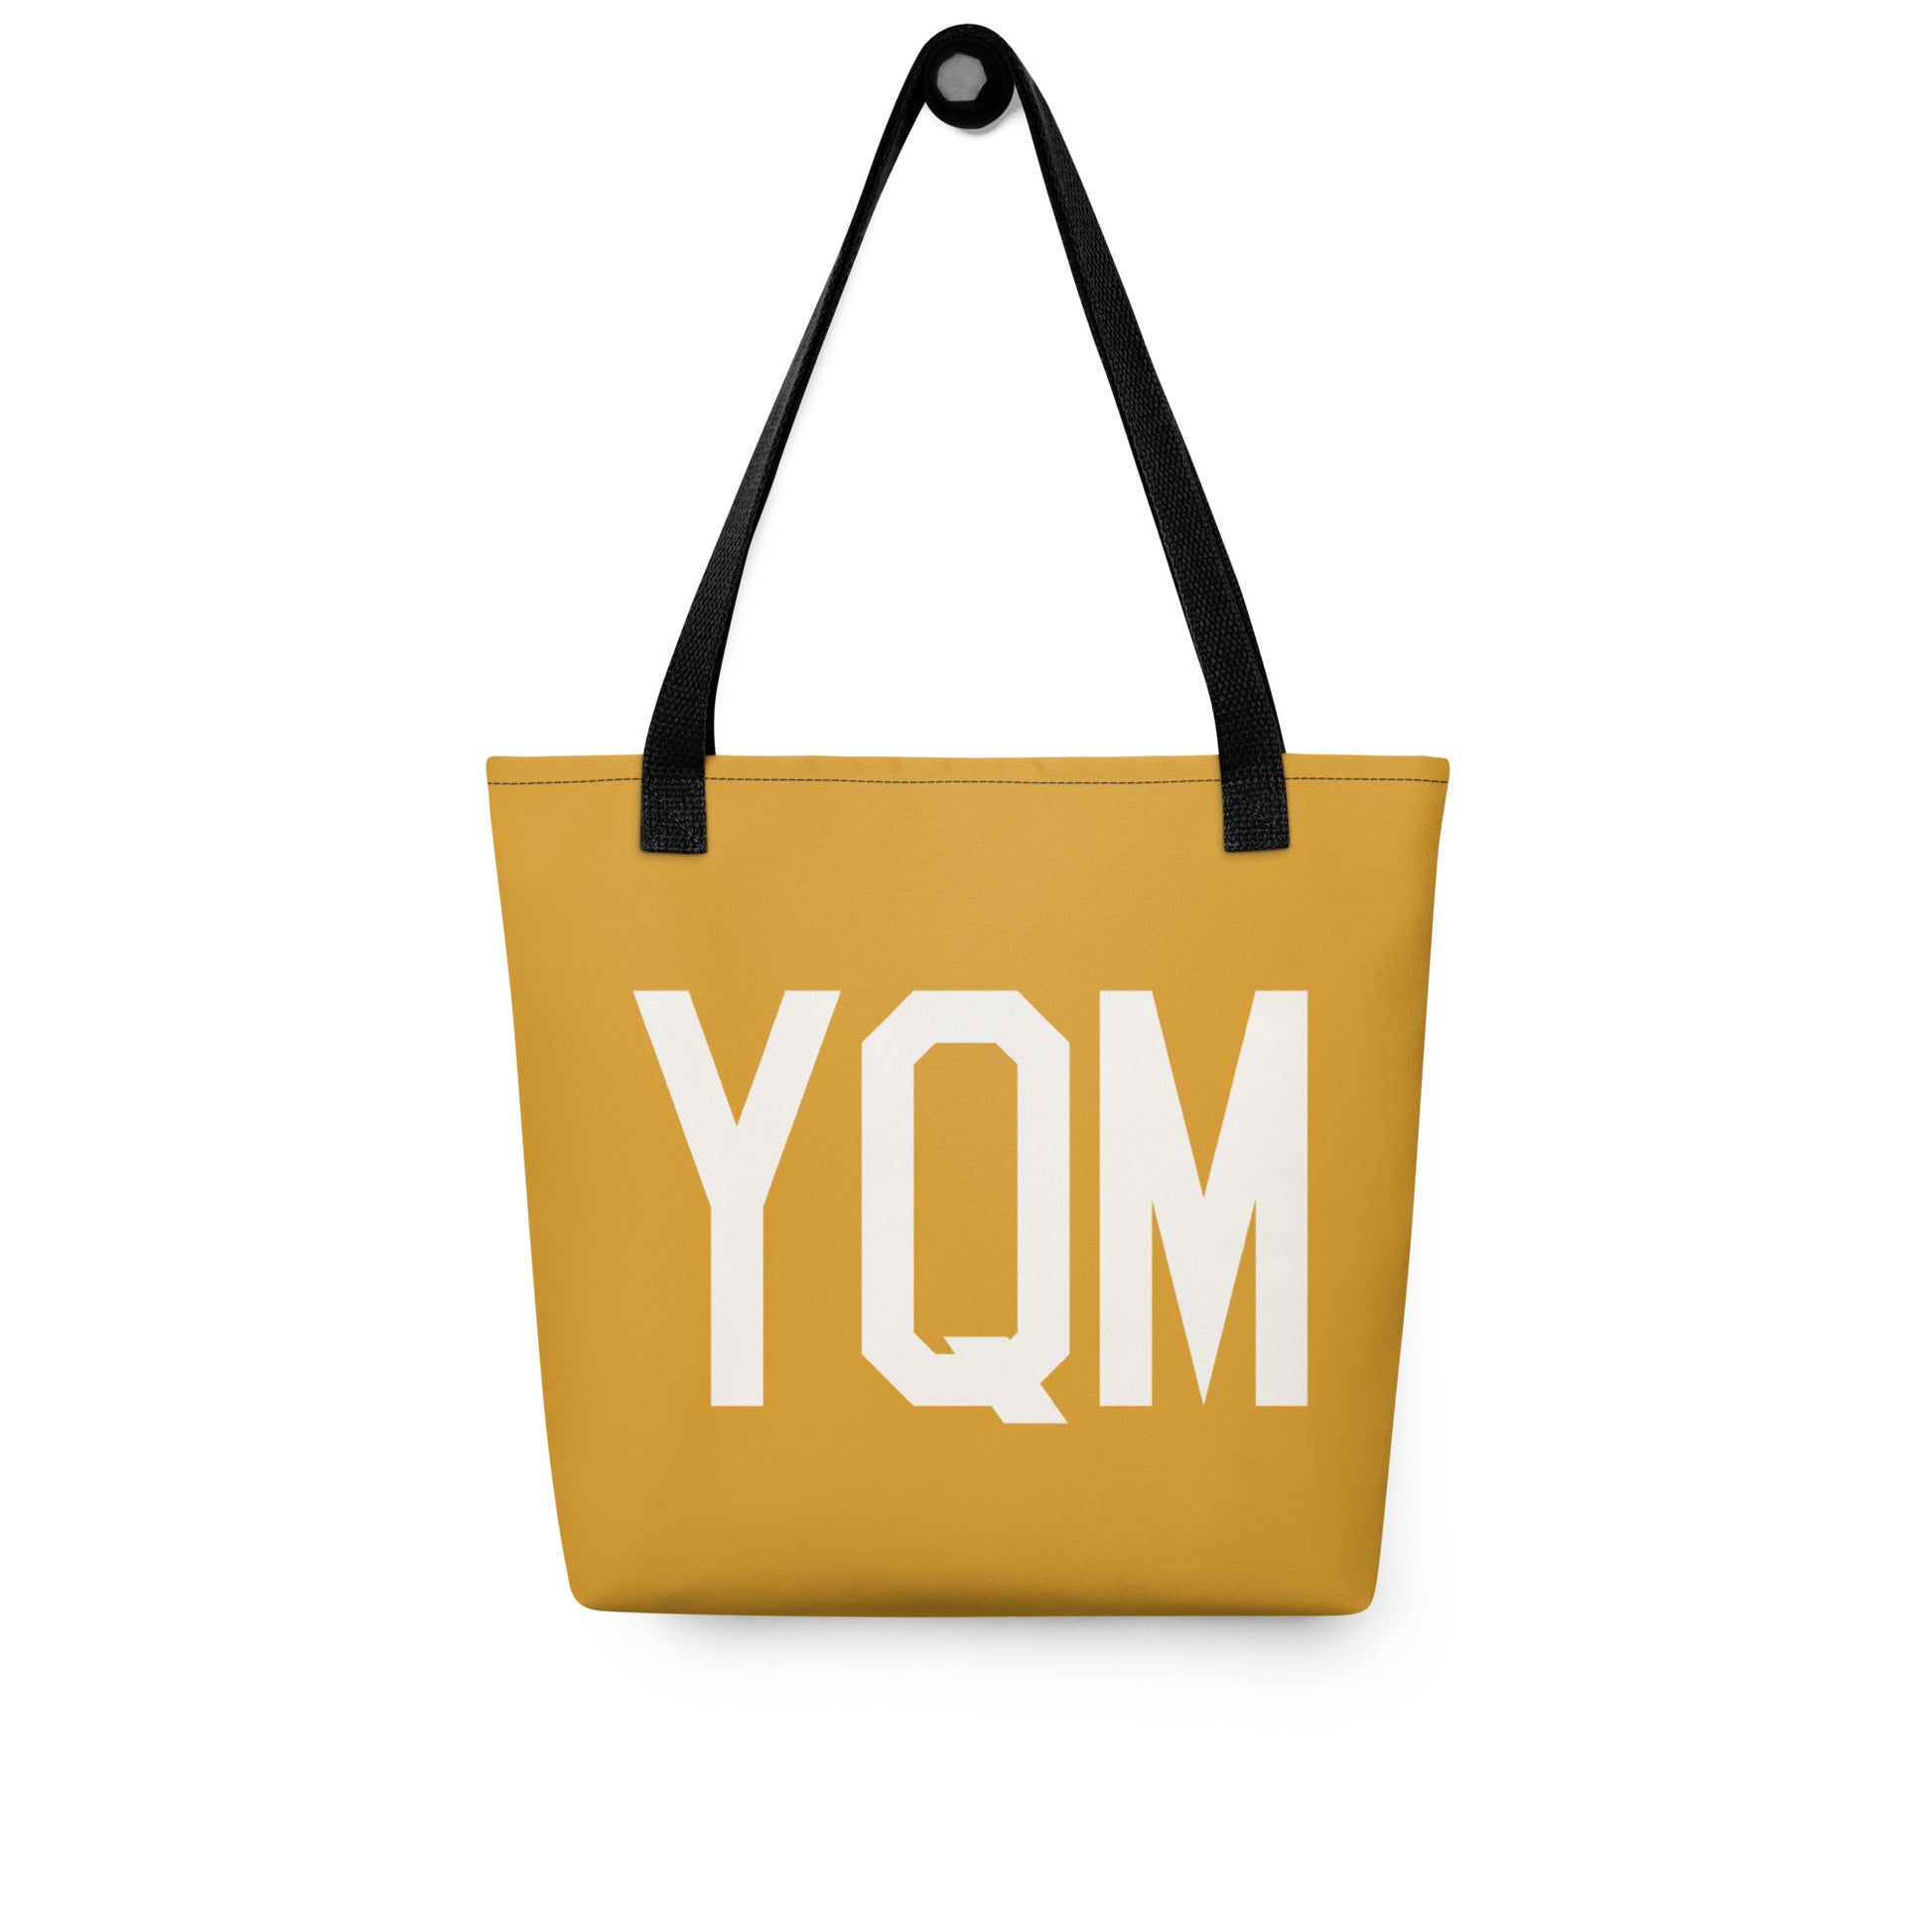 Aviation Gift Tote Bag - Buttercup • YQM Moncton • YHM Designs - Image 03